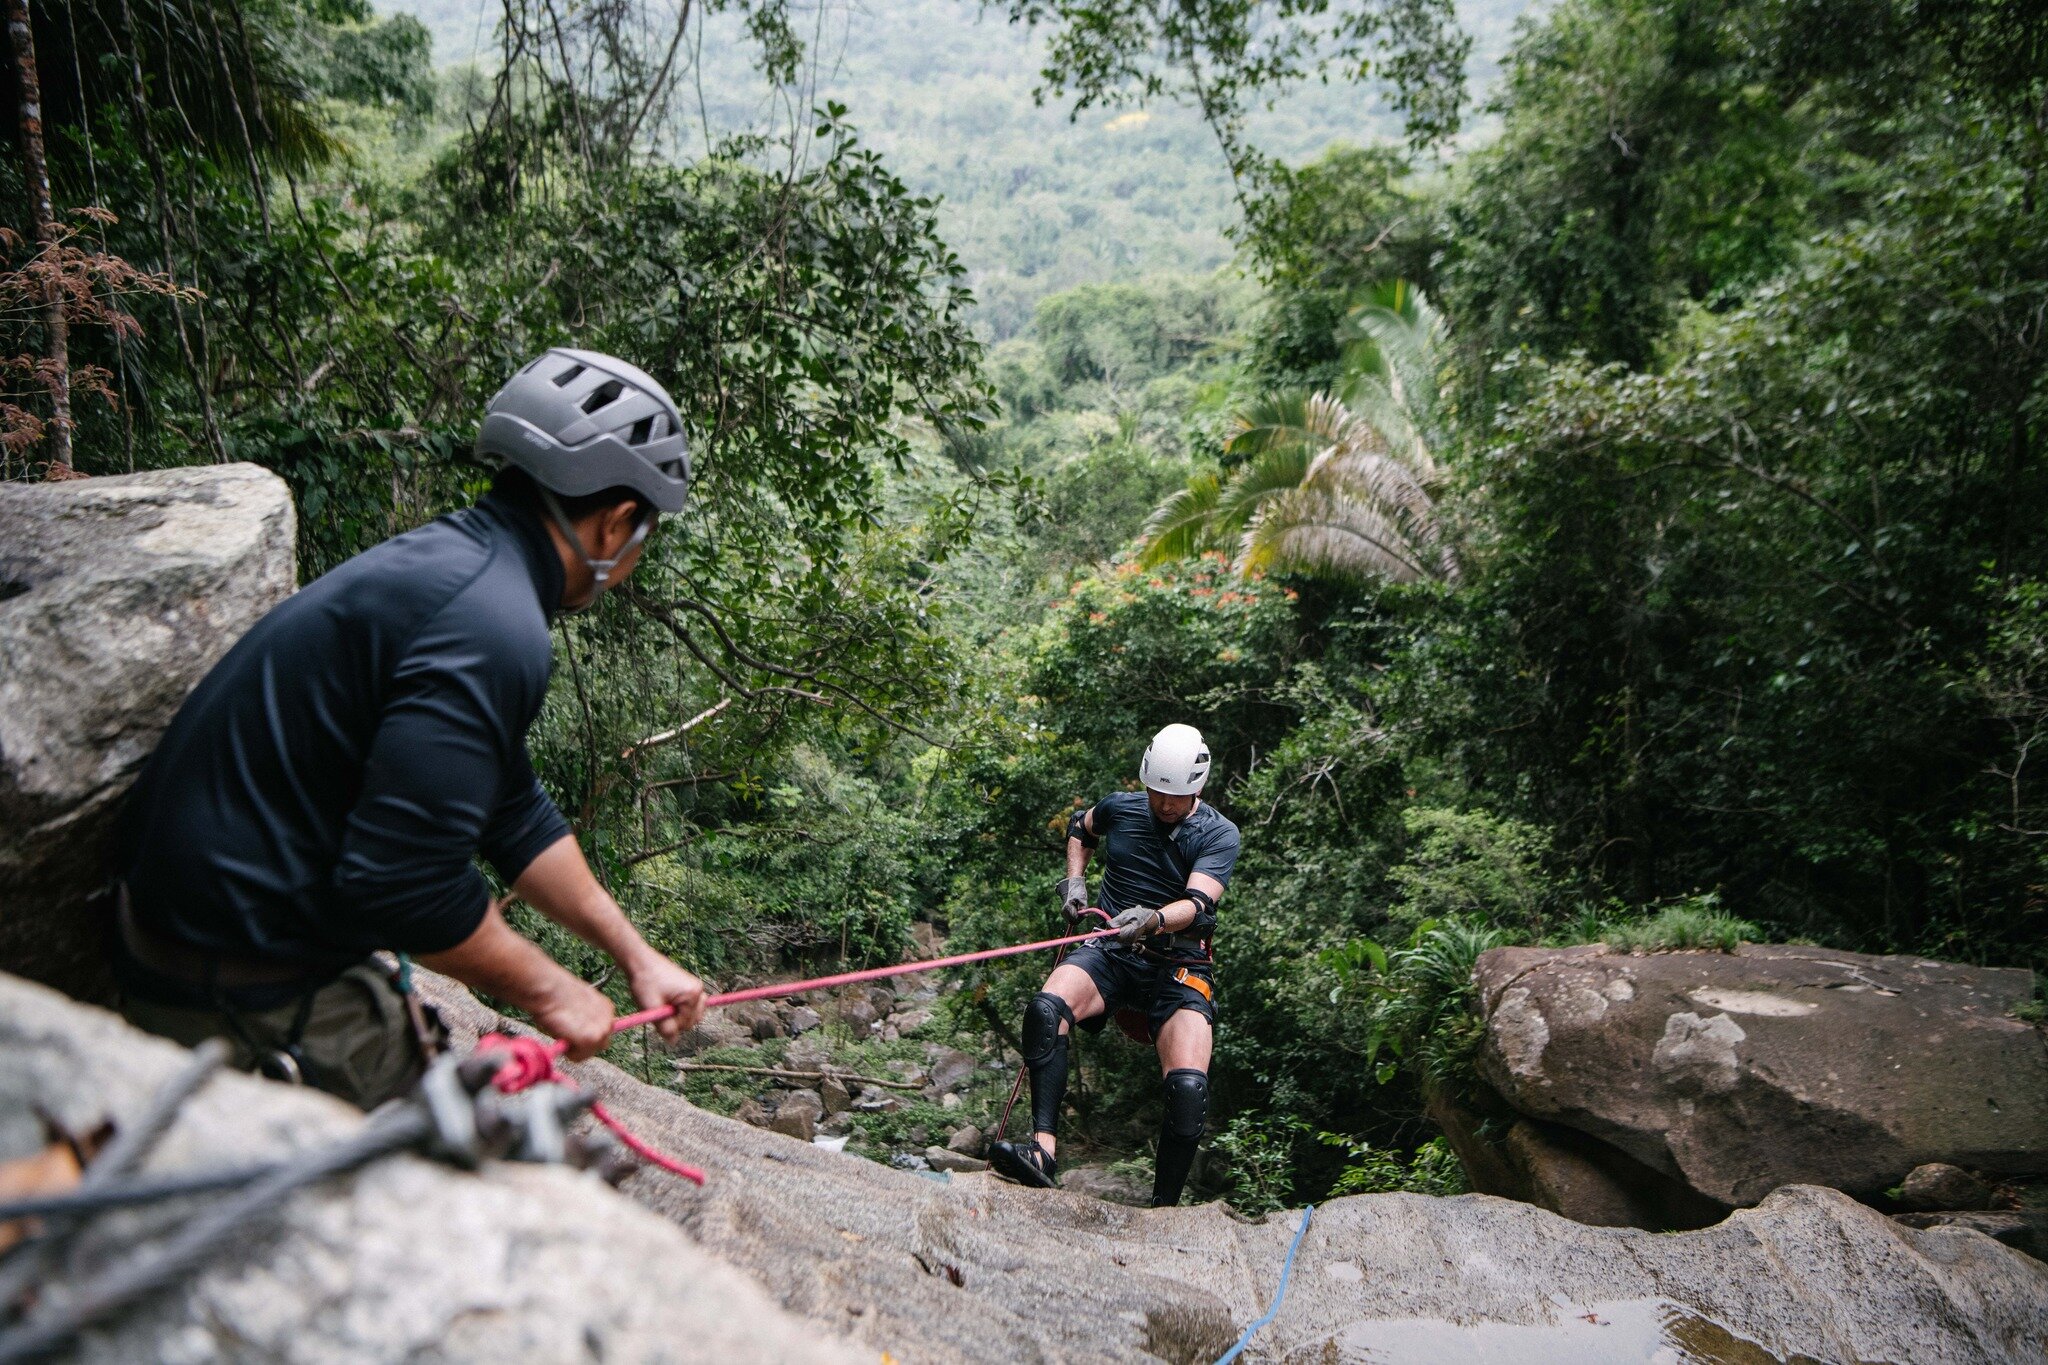 Ever dreamt of rappelling down a breathtaking waterfall? 🌊🧗&zwj;♂️ At Bocawina Rainforest Resort, we turn dreams into adrenaline-pumping reality! With our highly professional guides and top-notch safety standards, you're in for an exhilarating yet 